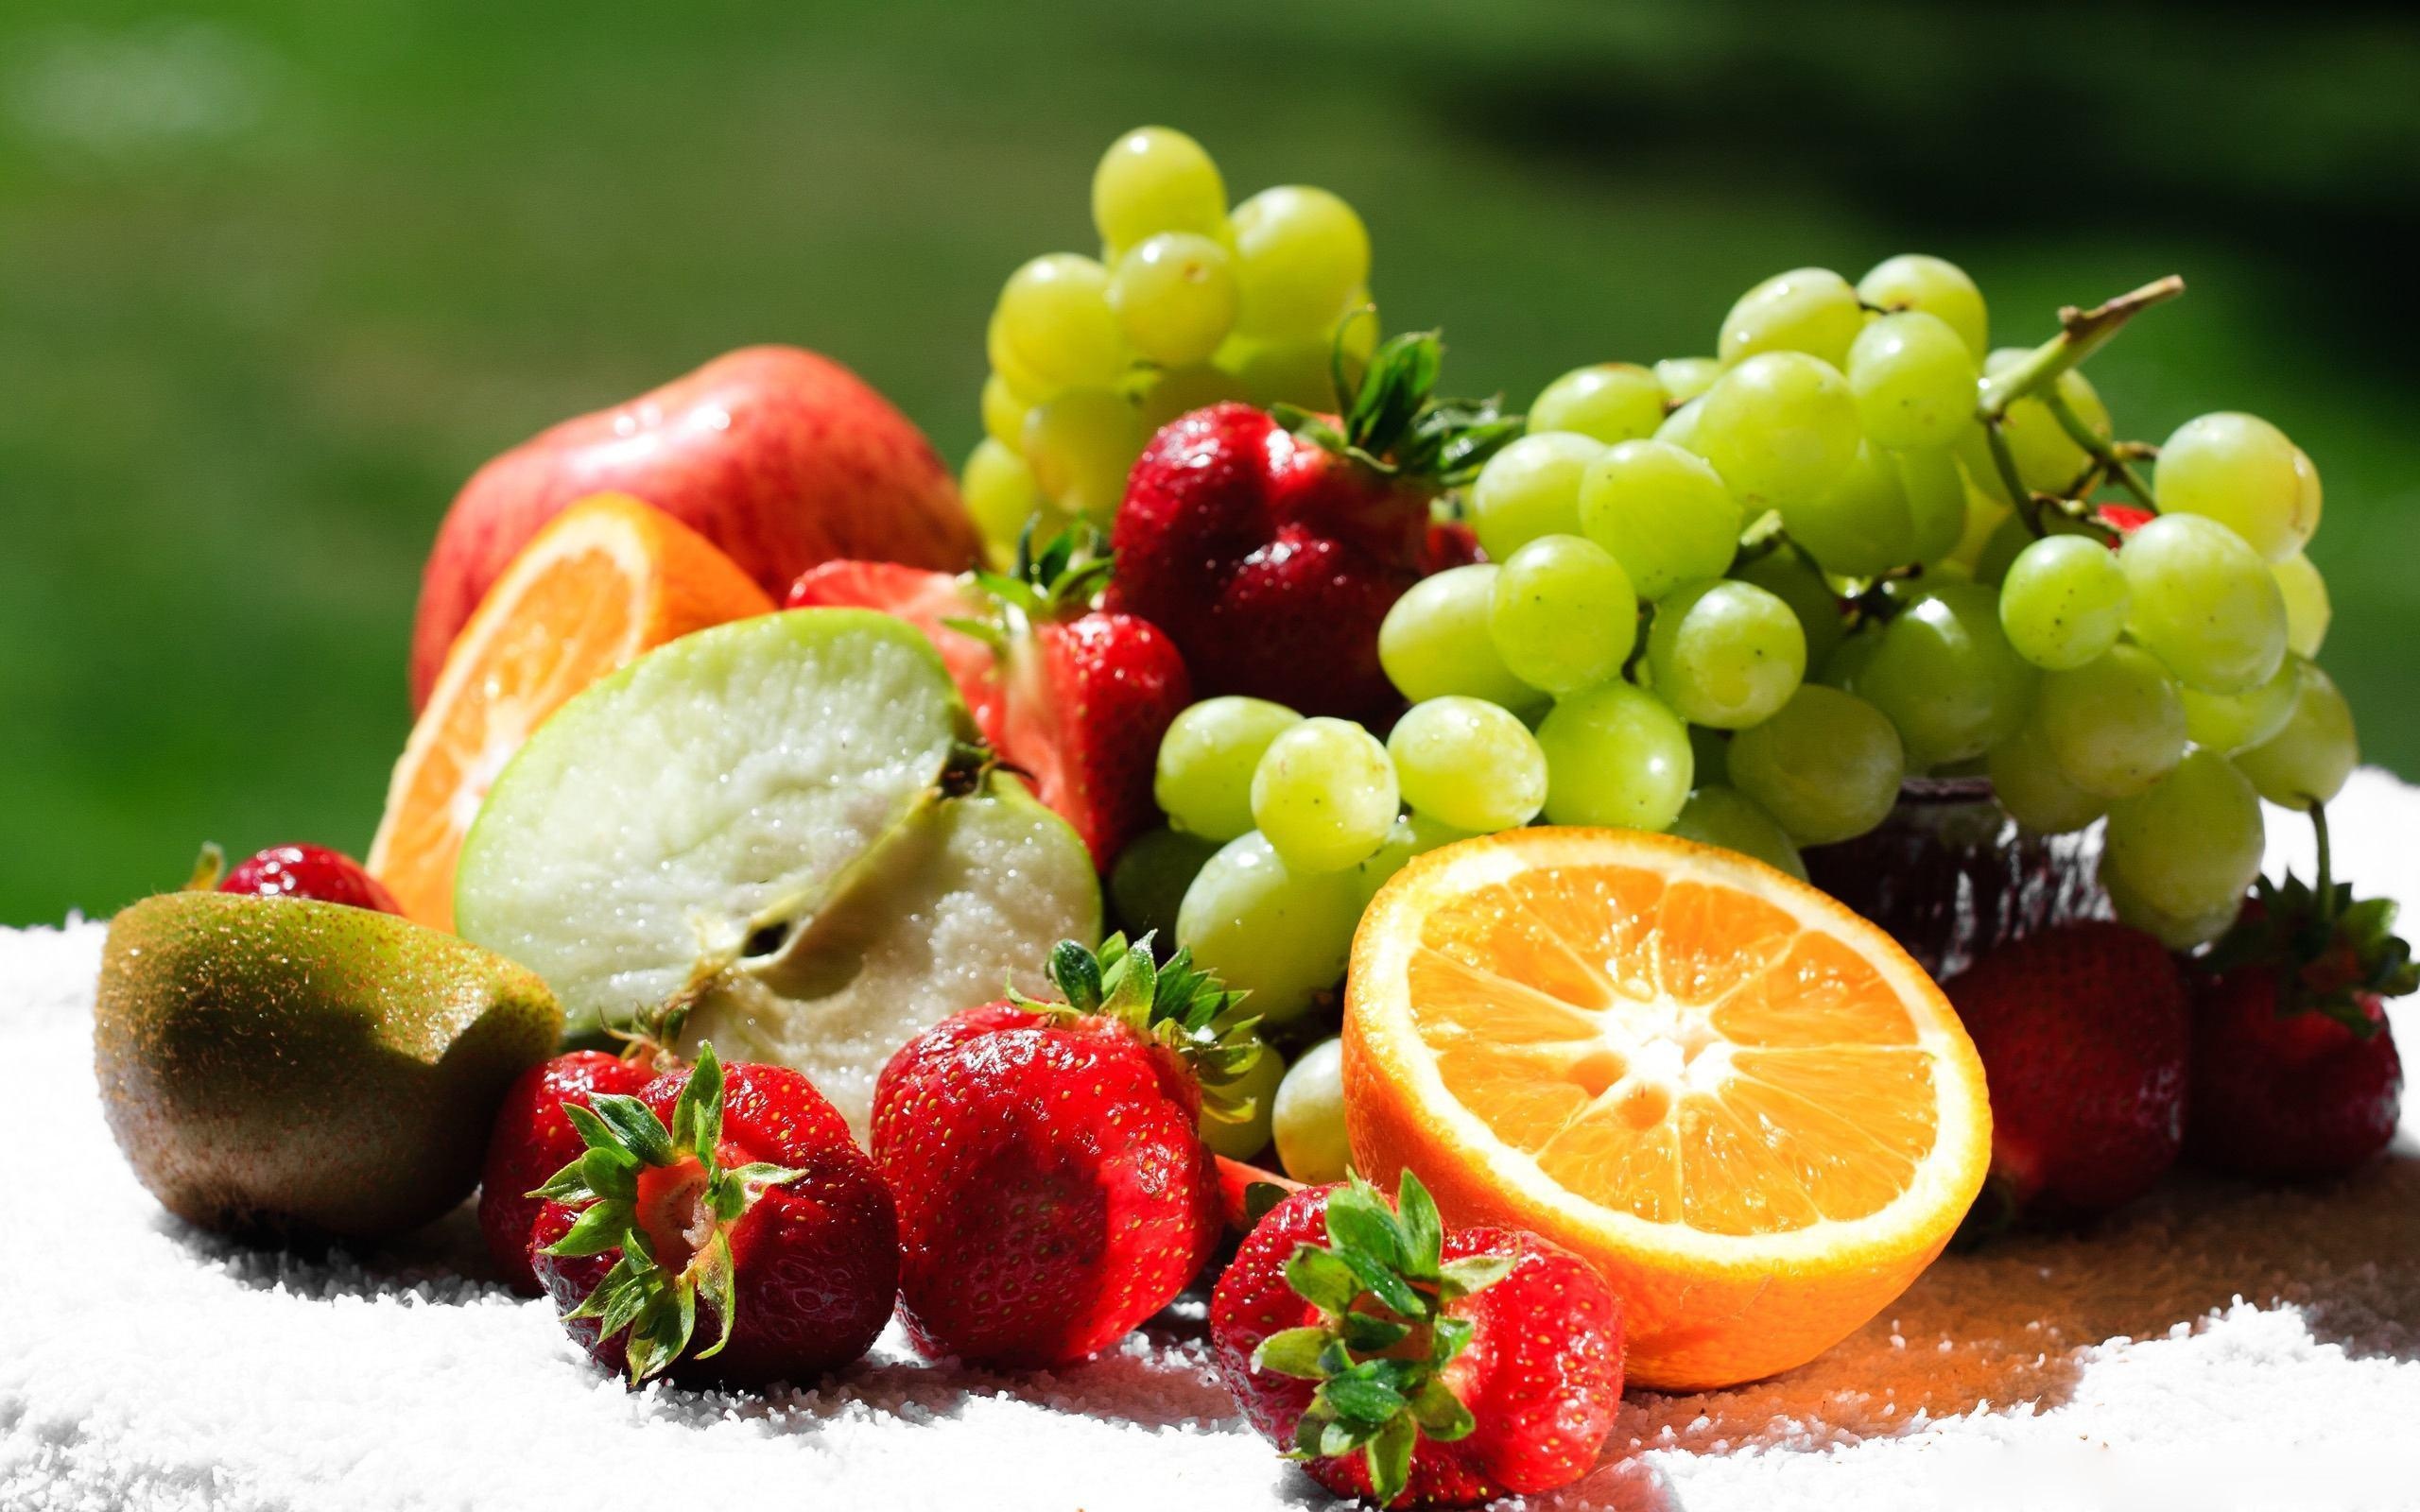 Fruitful wallpapers, Nature's goodness, Vibrant and colorful, Wholesome and nutritious, 2560x1600 HD Desktop